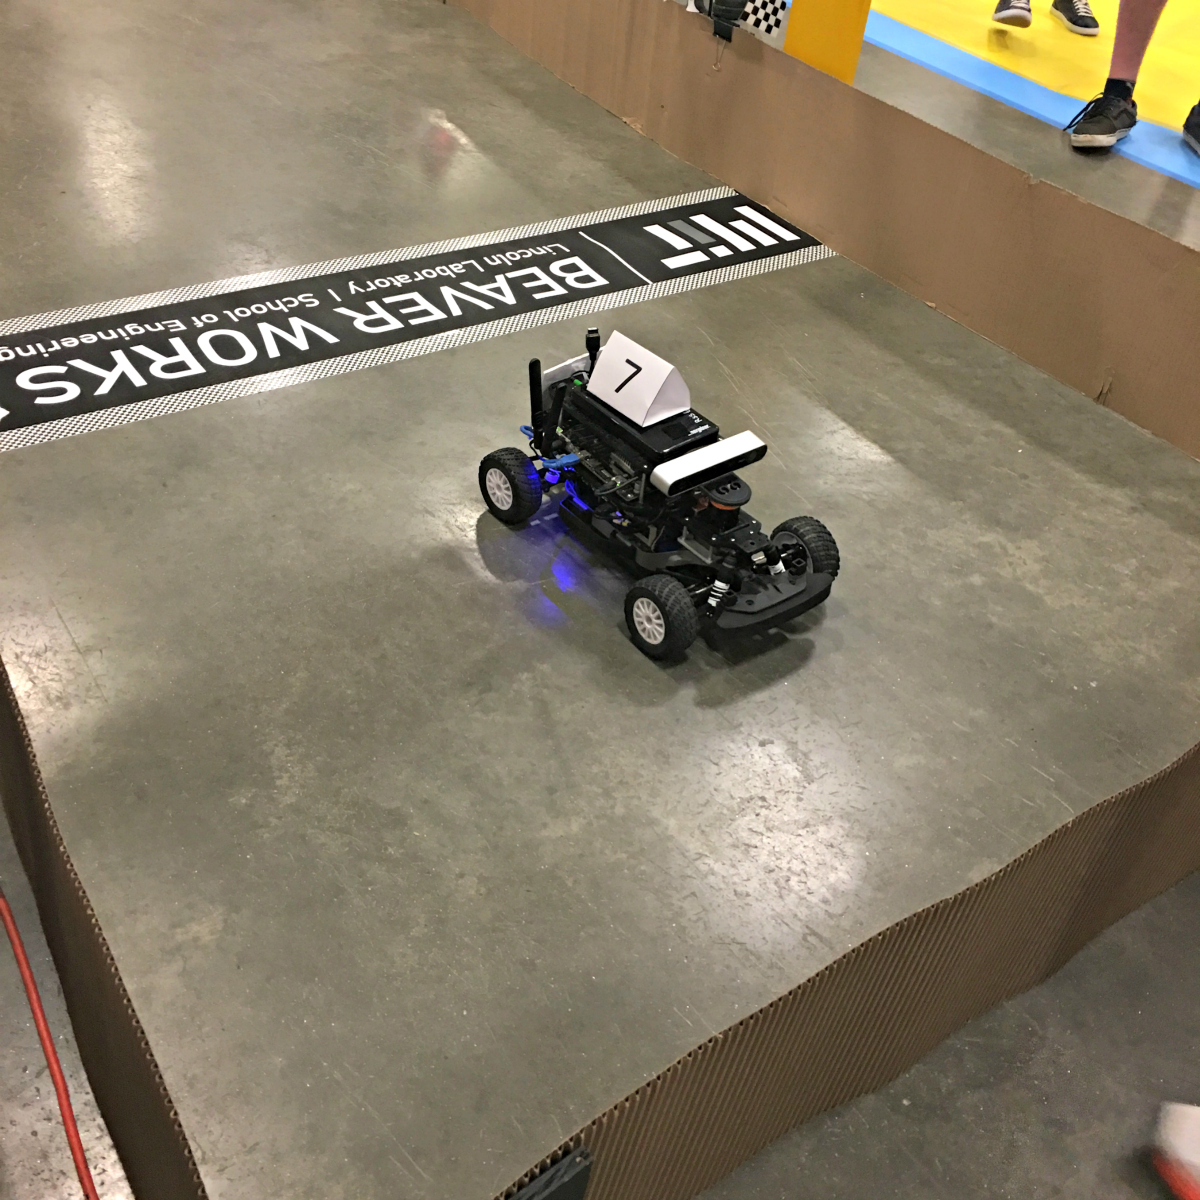 An autonomous vehicle programmed by Matthew Tang and his team at the 2017 MIT Beaver Works Summer Institute